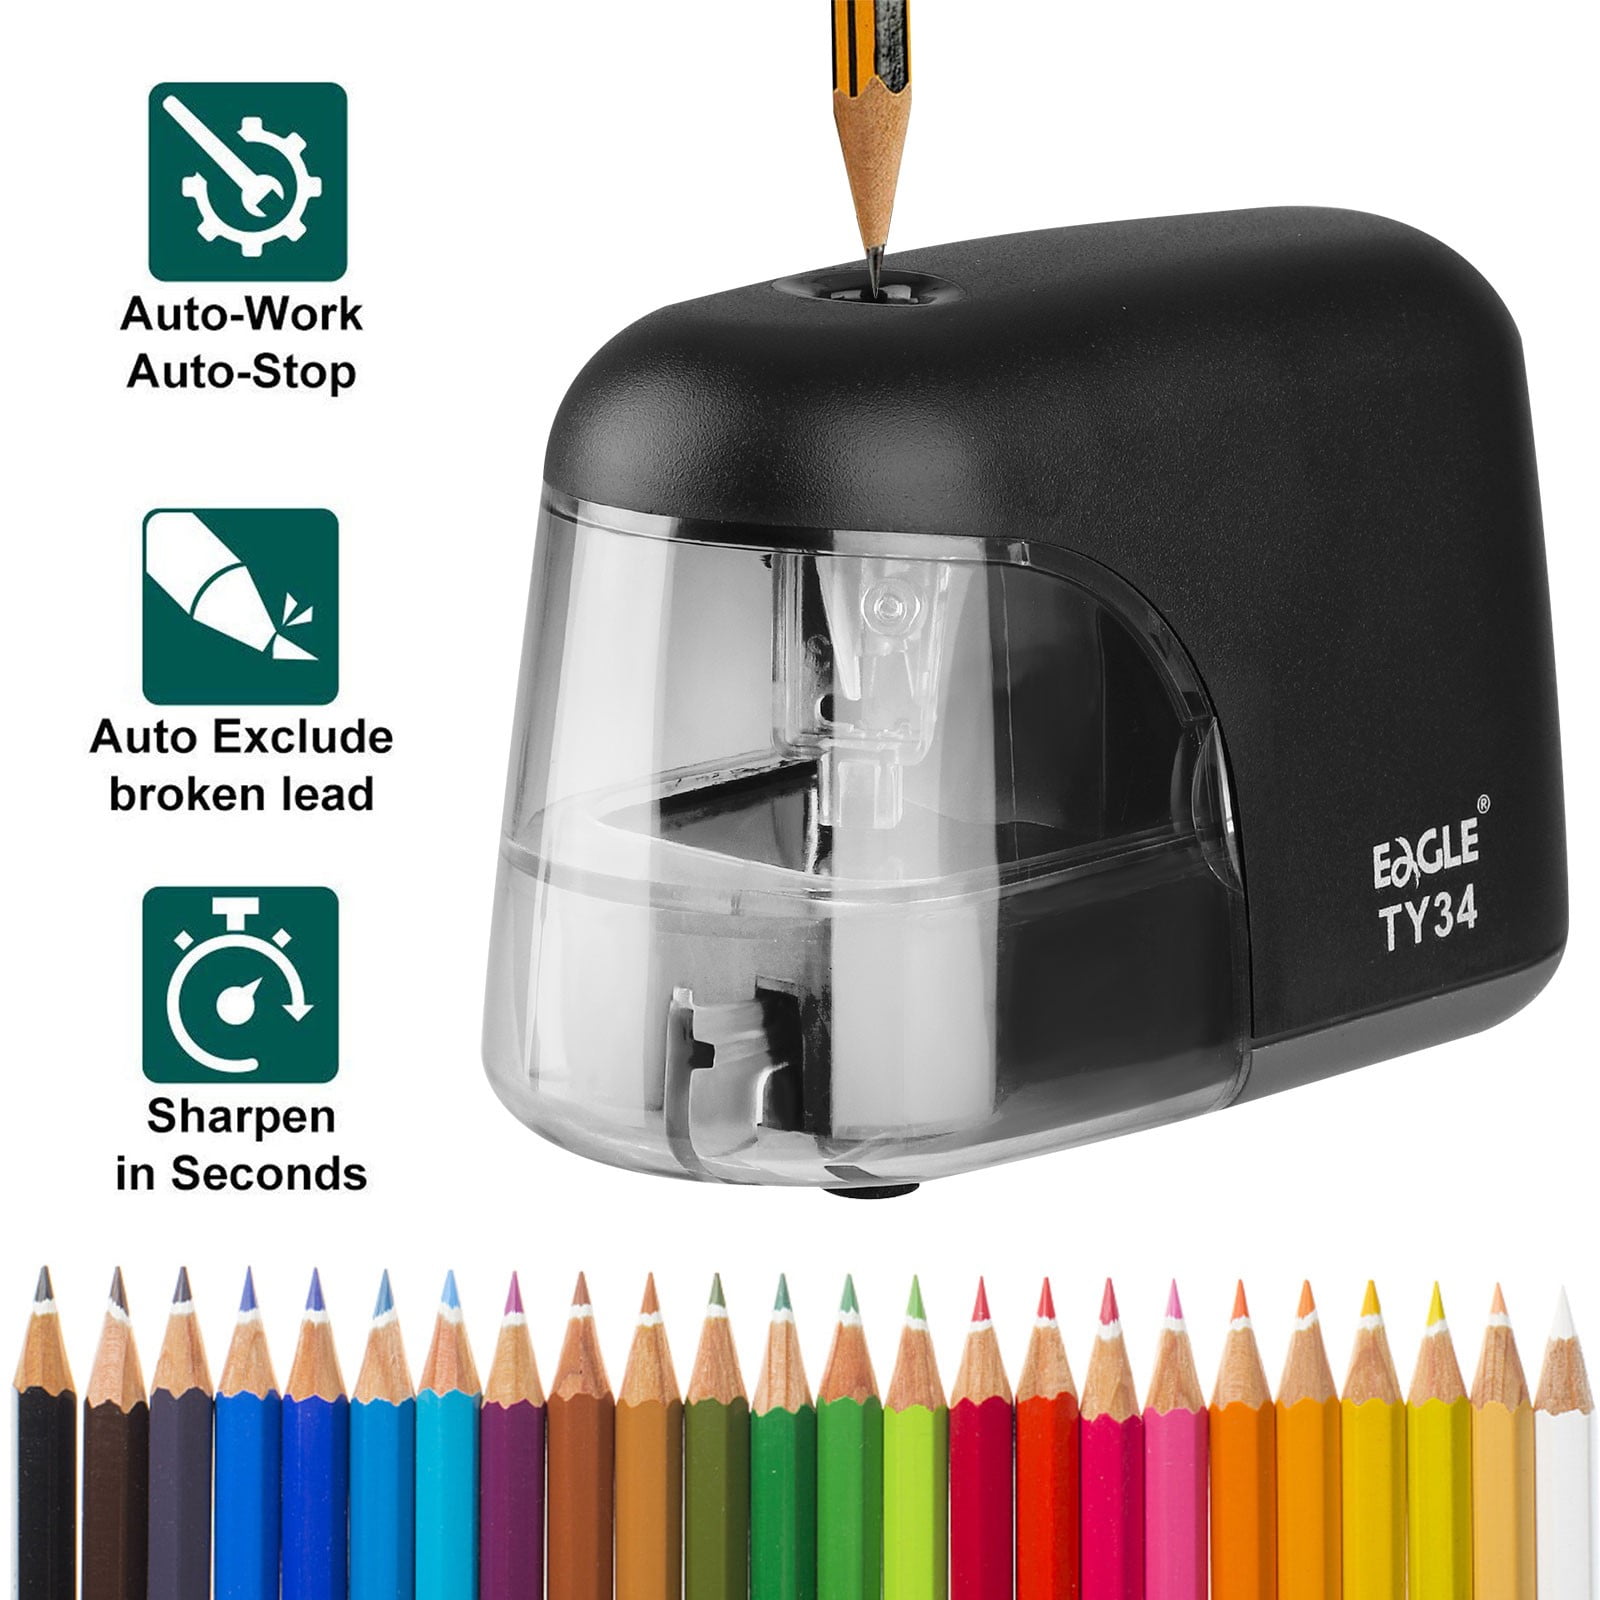 Electric Pencil Sharpener for Colored Pencils For No.2 and 6-12mm Pencils,  Dual Hole for Office School Artists Adults Kids Use